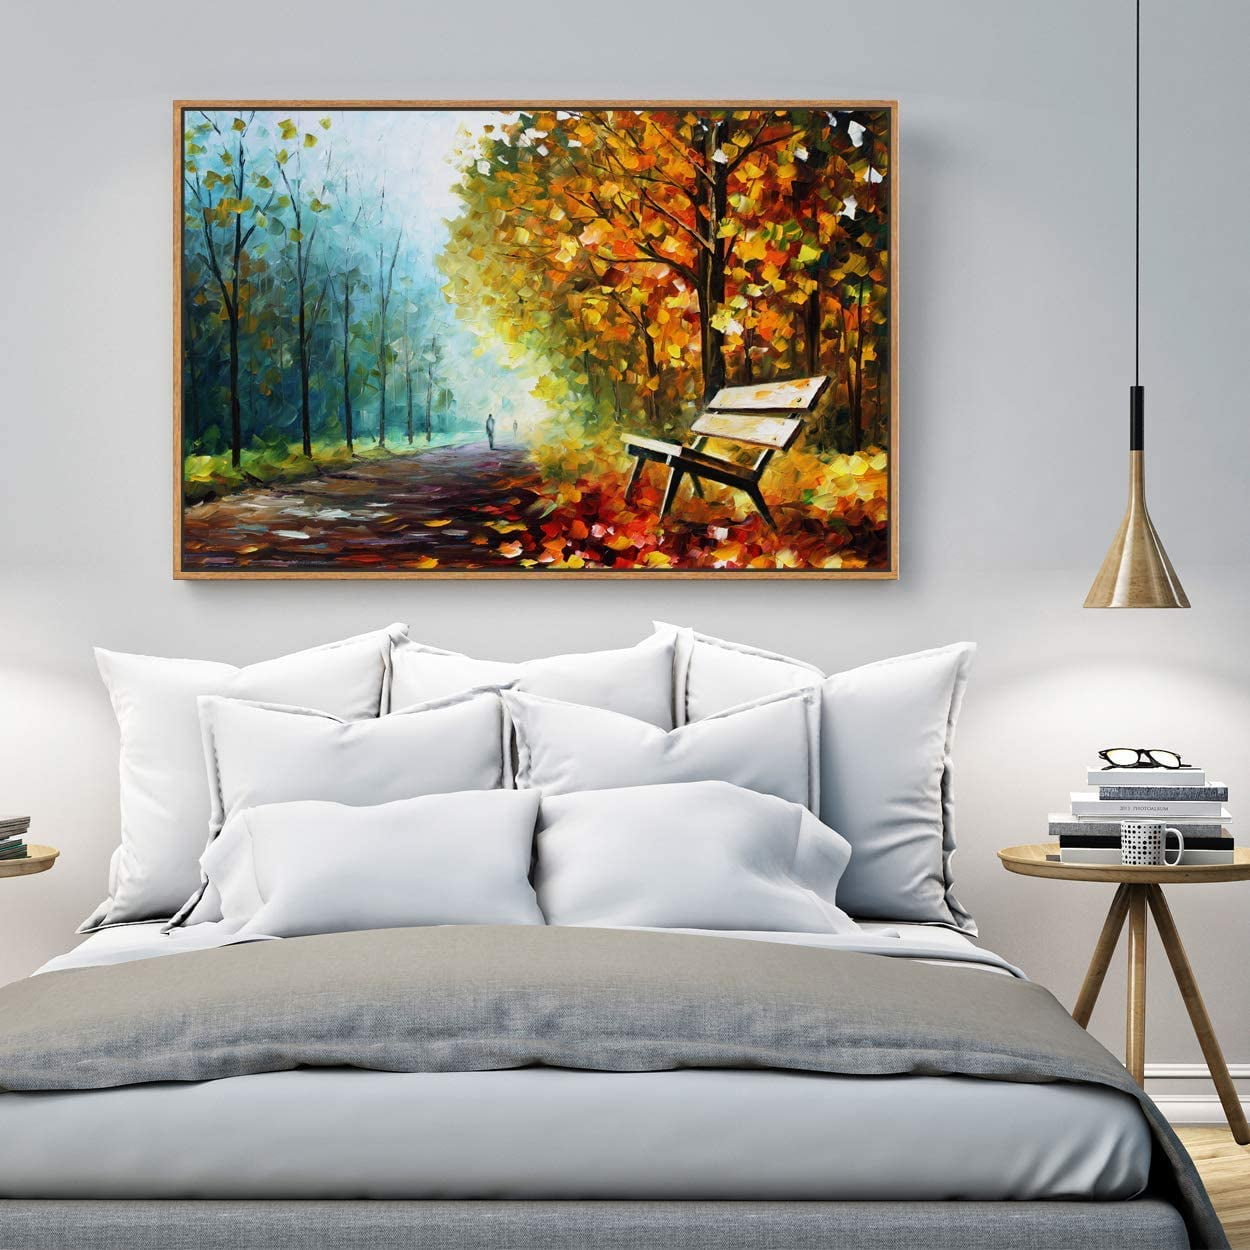 wall26 Floating Framed Canvas Wall Art for Living Room, Bedroom Scenery